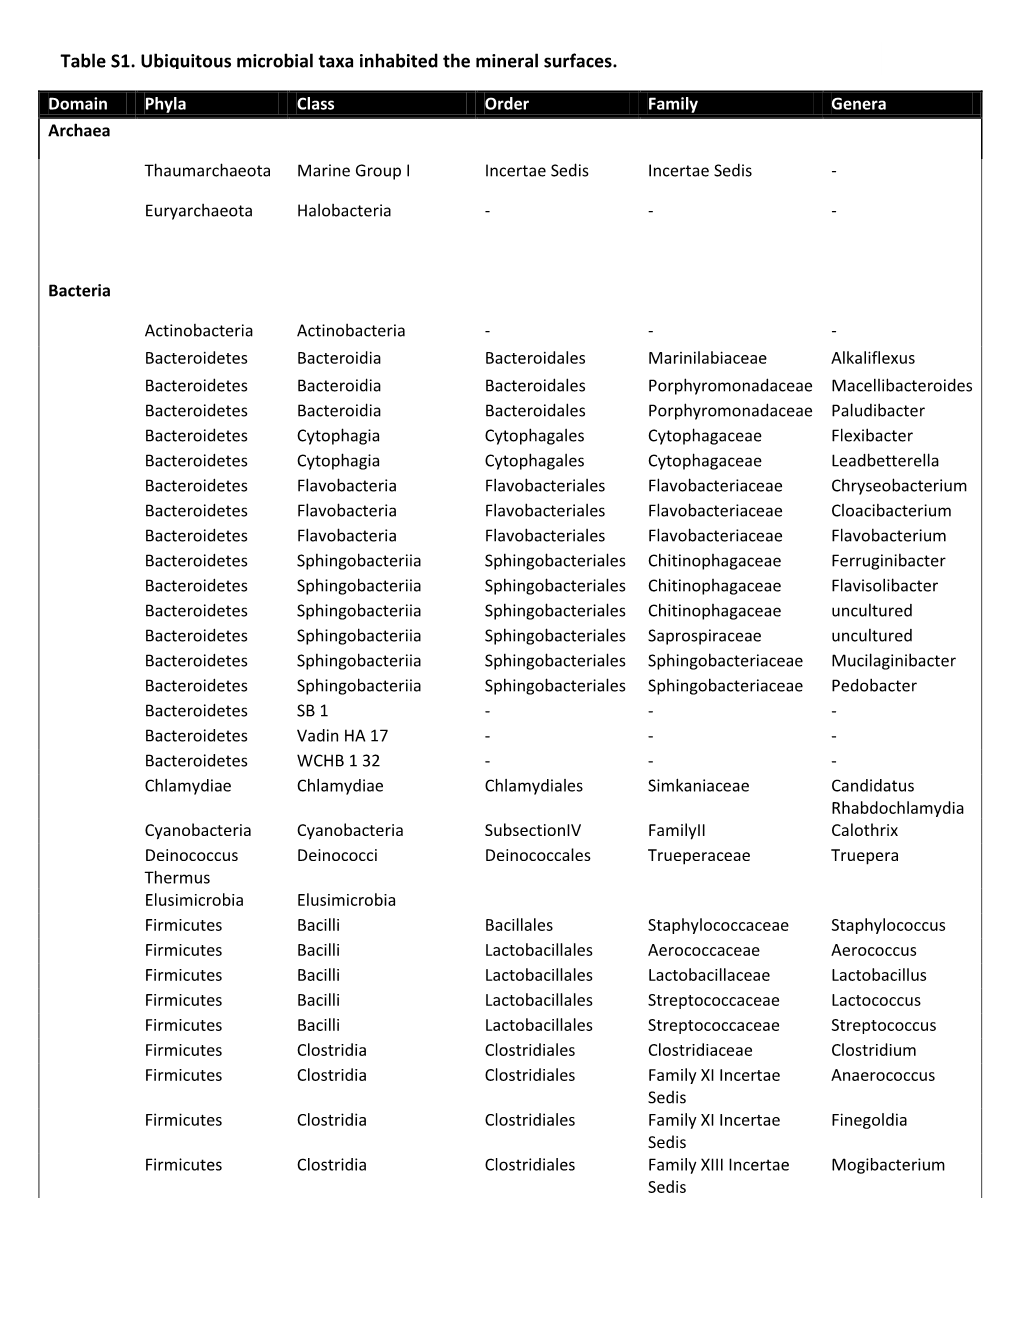 Table S1. Ubiquitous Microbial Taxa Inhabited the Mineral Surfaces